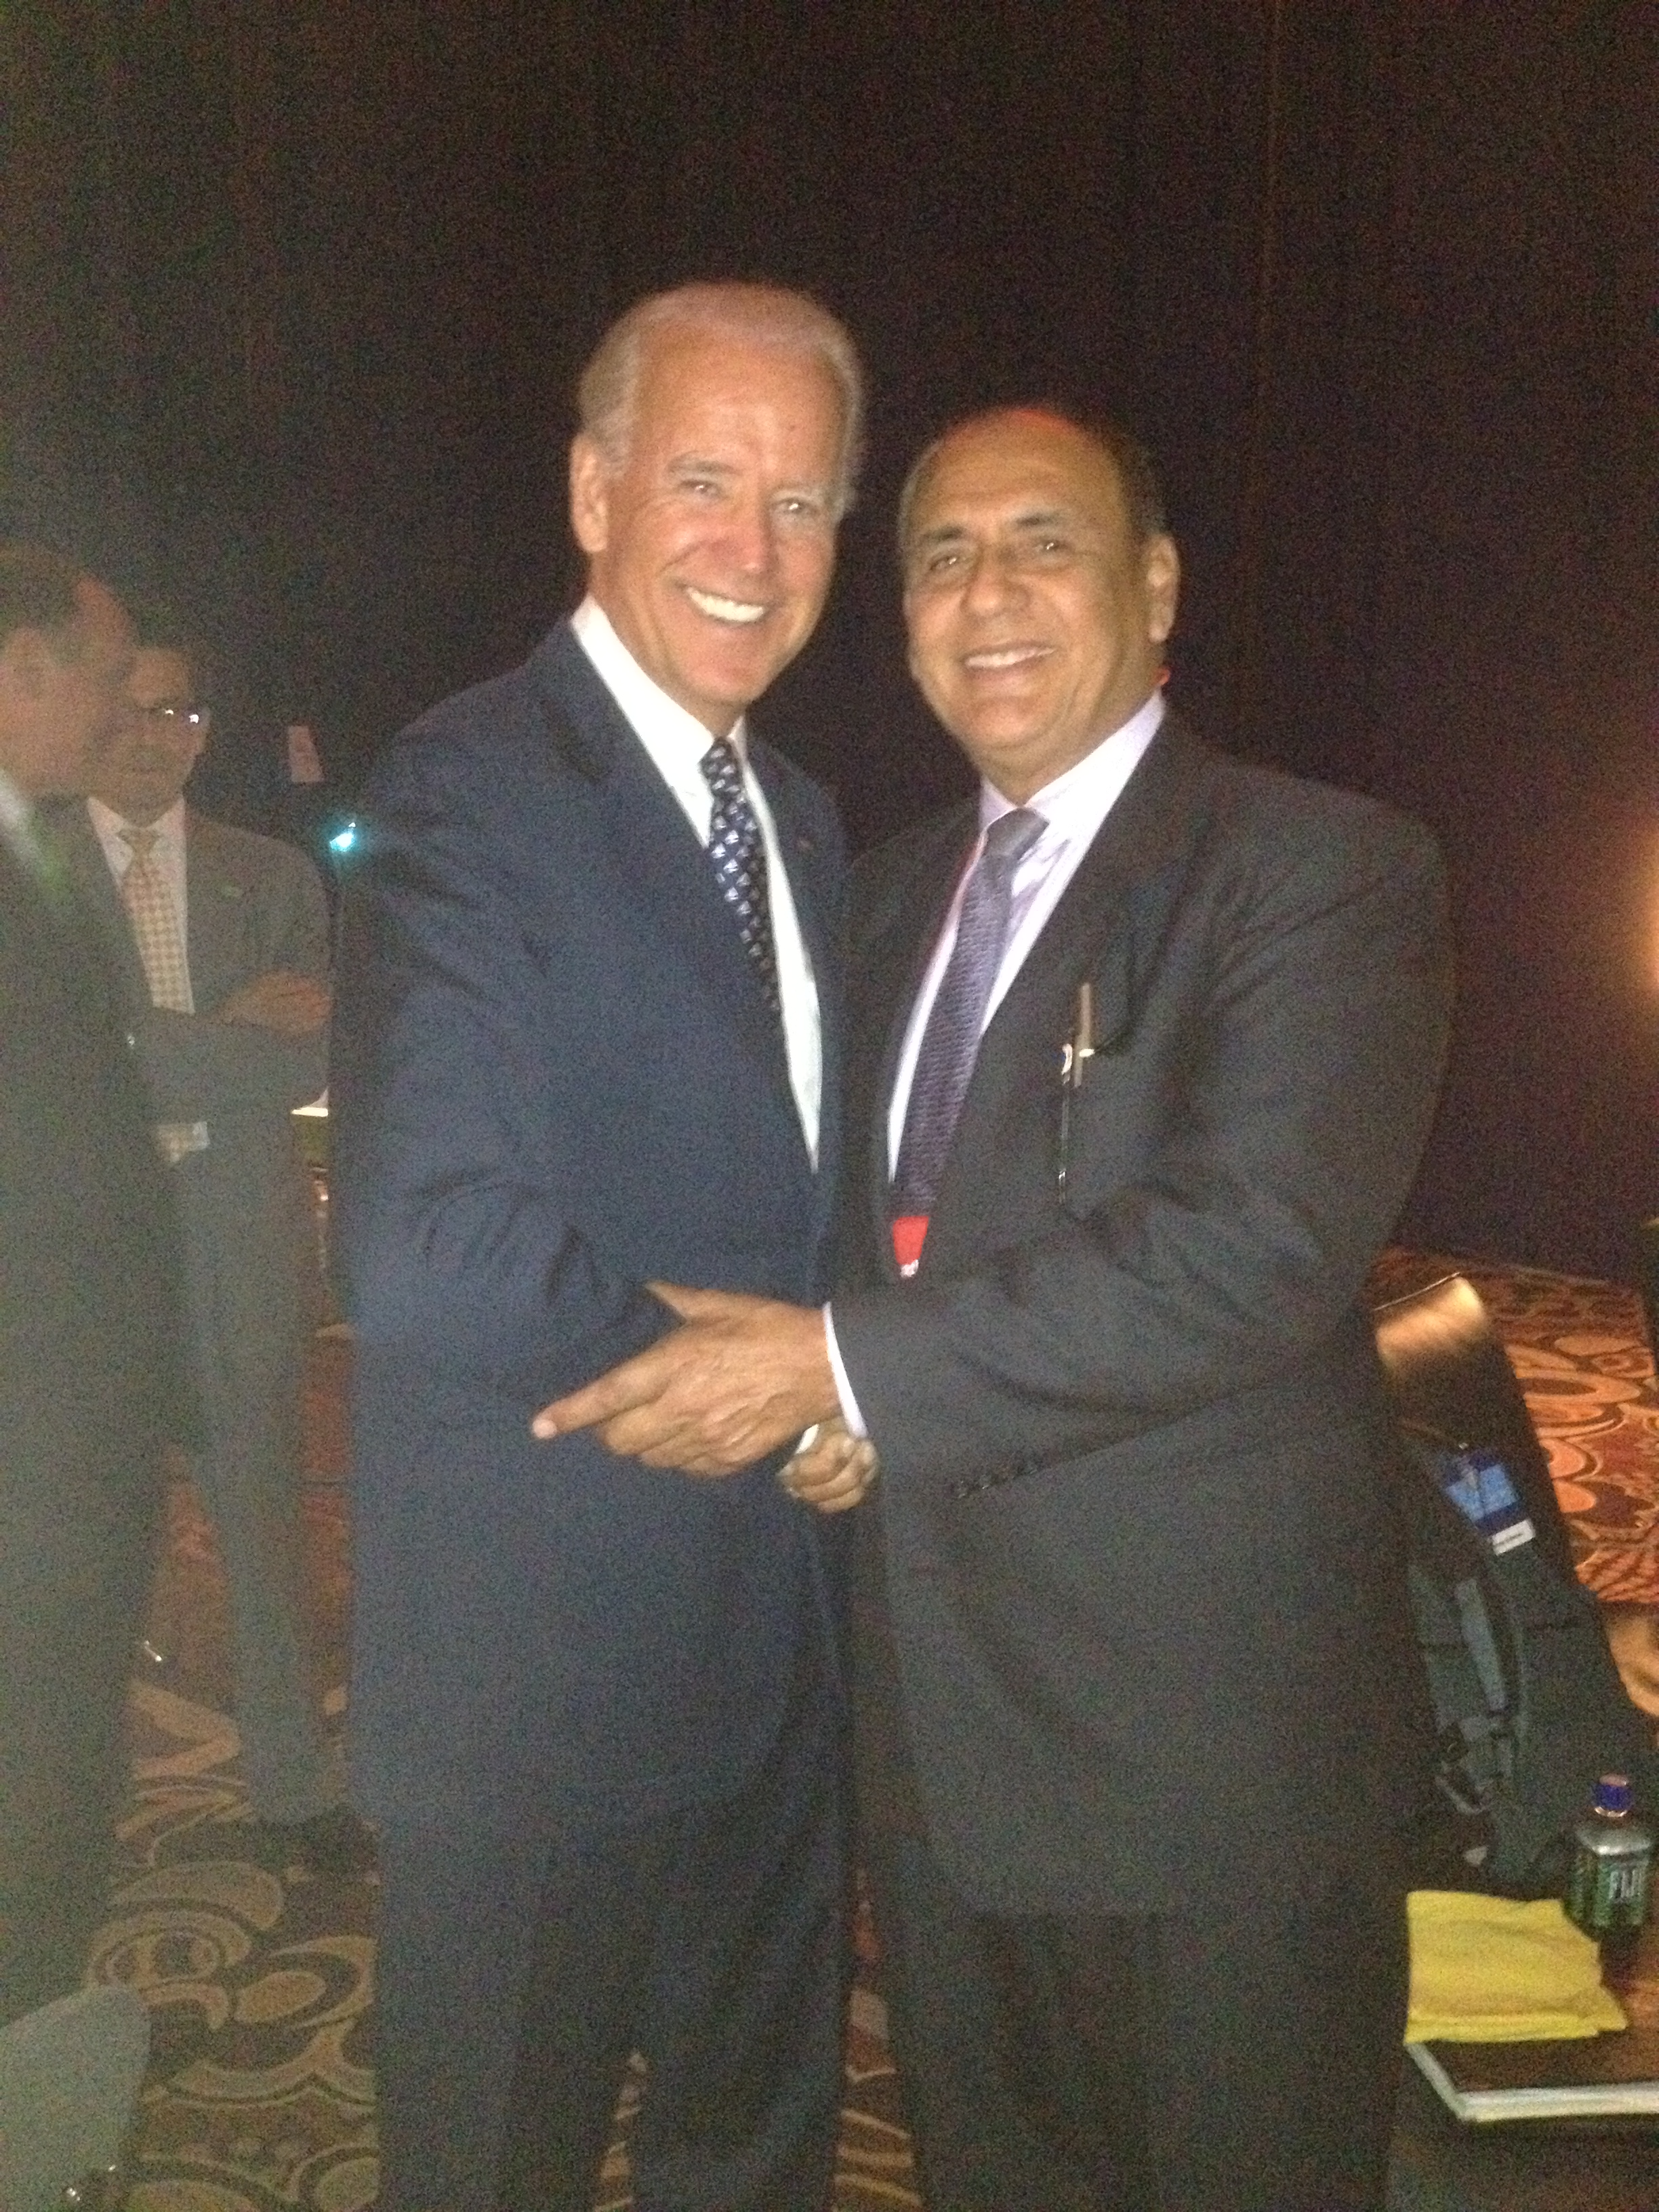 Vice President Joe Biden and I after this speech in Las Vegas.